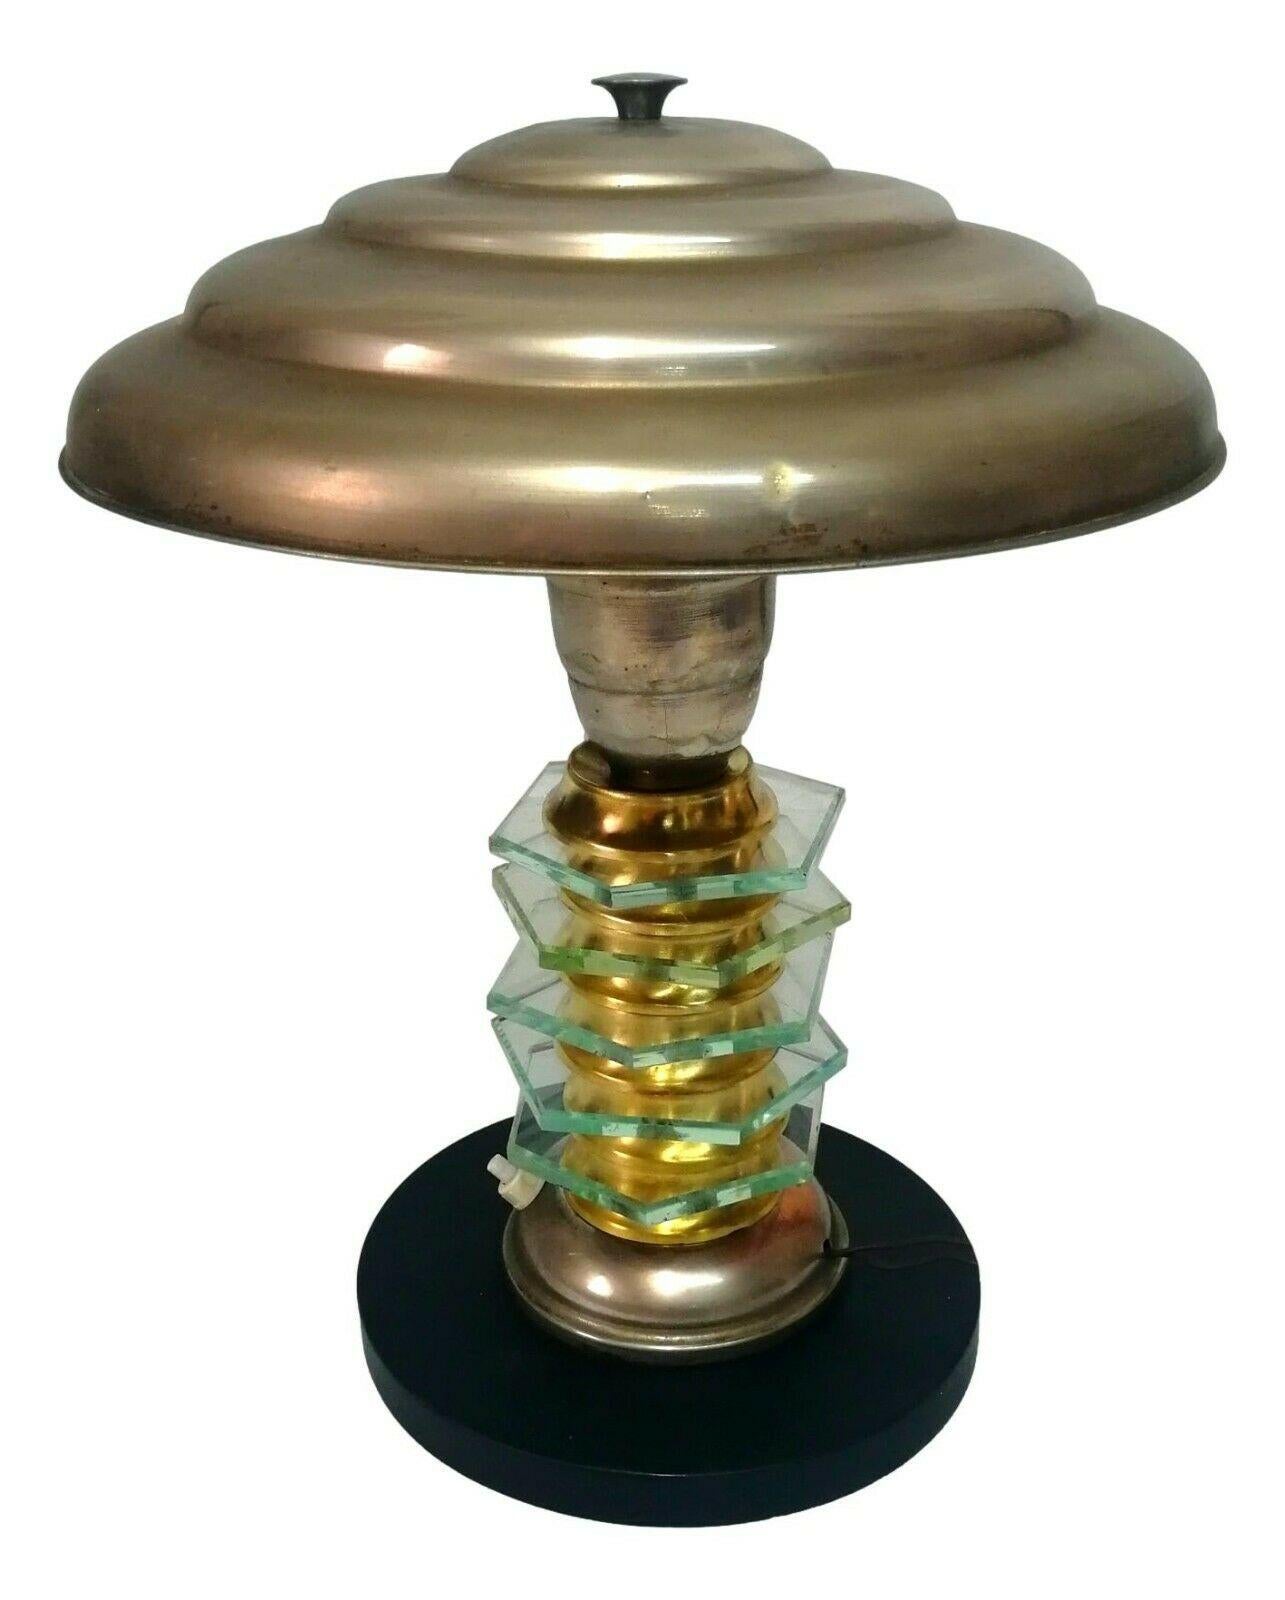 splendid art decò table lamp, original from the 50s, made with an aluminum hat, central body in brass and crystal worked in hexagons, base in black lacquered wood

It measures 36 cm in height, 30 cm in diameter at the top and 18 cm in diameter at